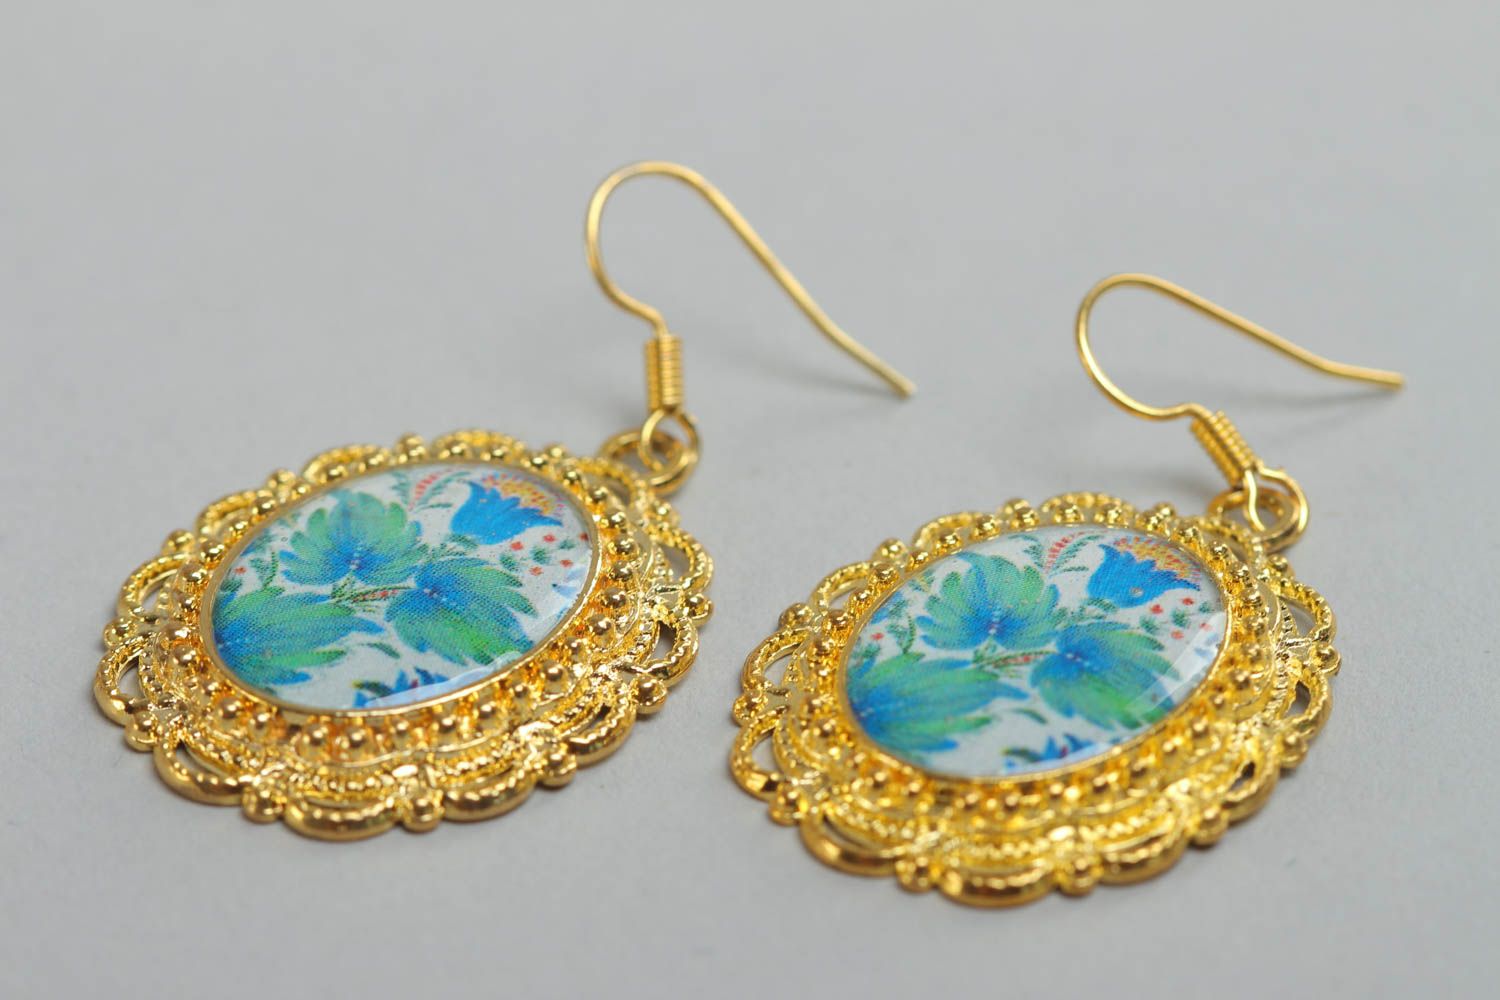 Handmade oval floral earrings with golden colored metal basis and glass glaze photo 3